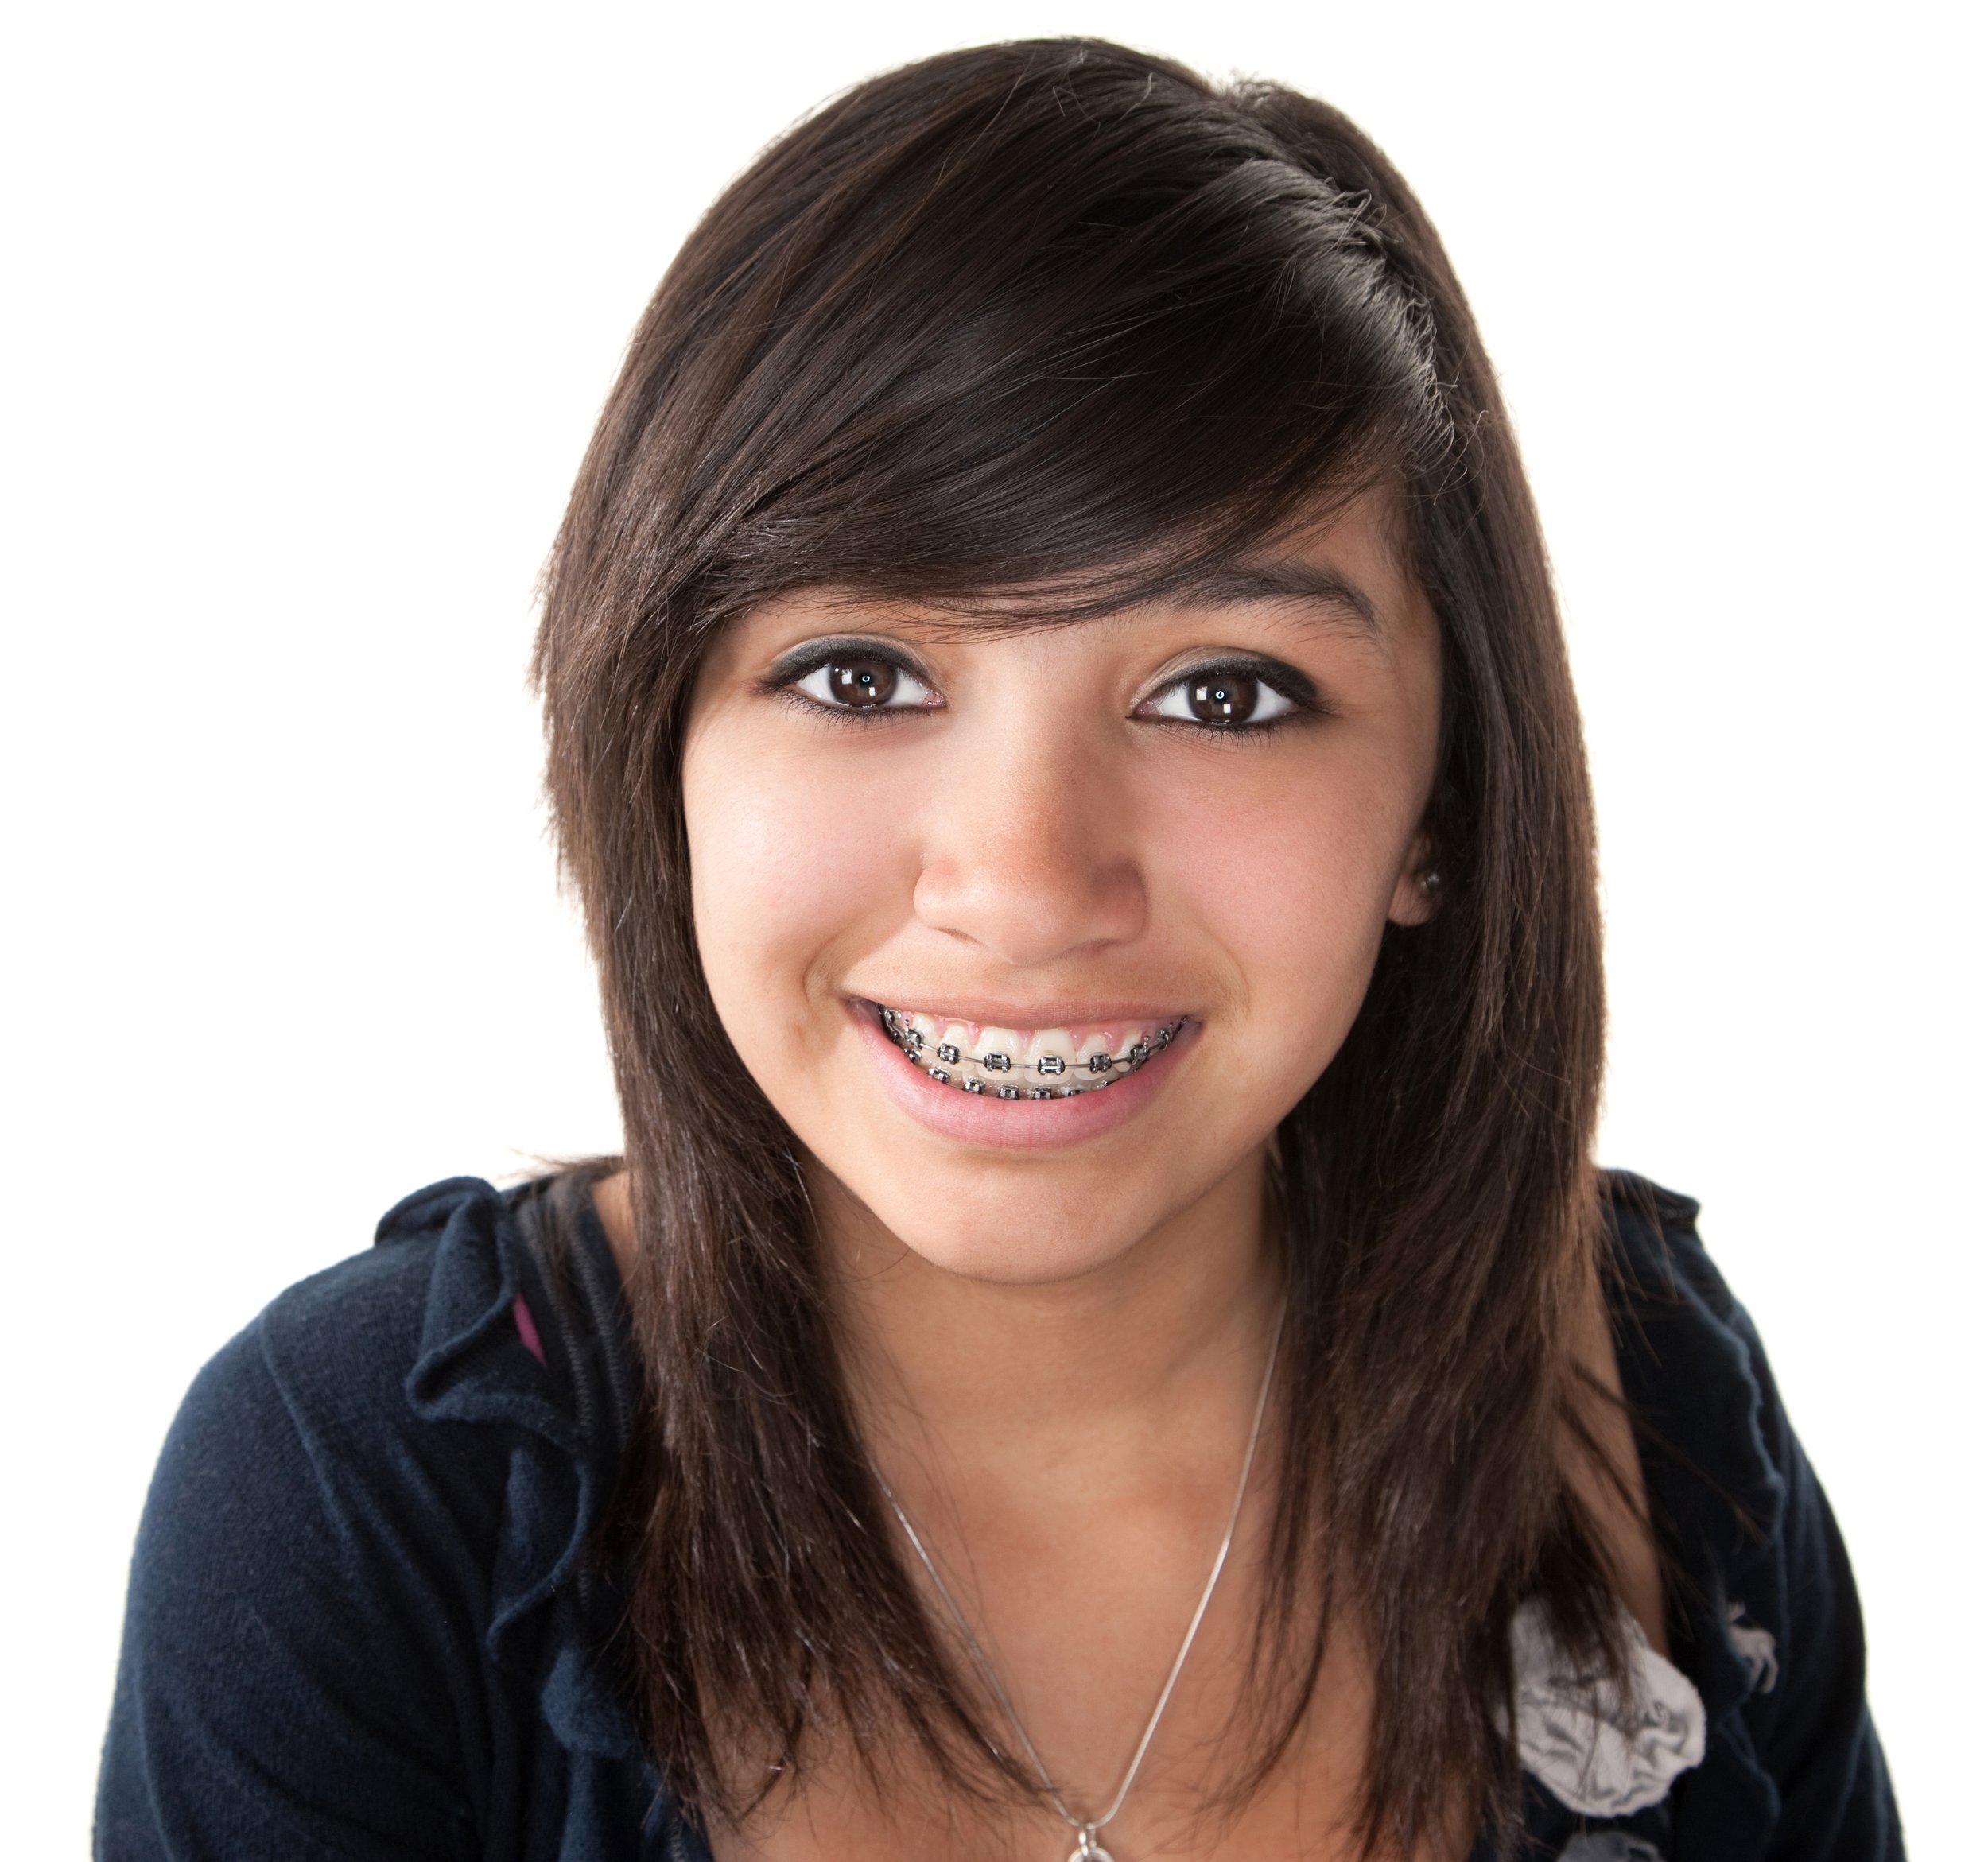 Dental Braces in teens and adults, Orthodontic treatment.